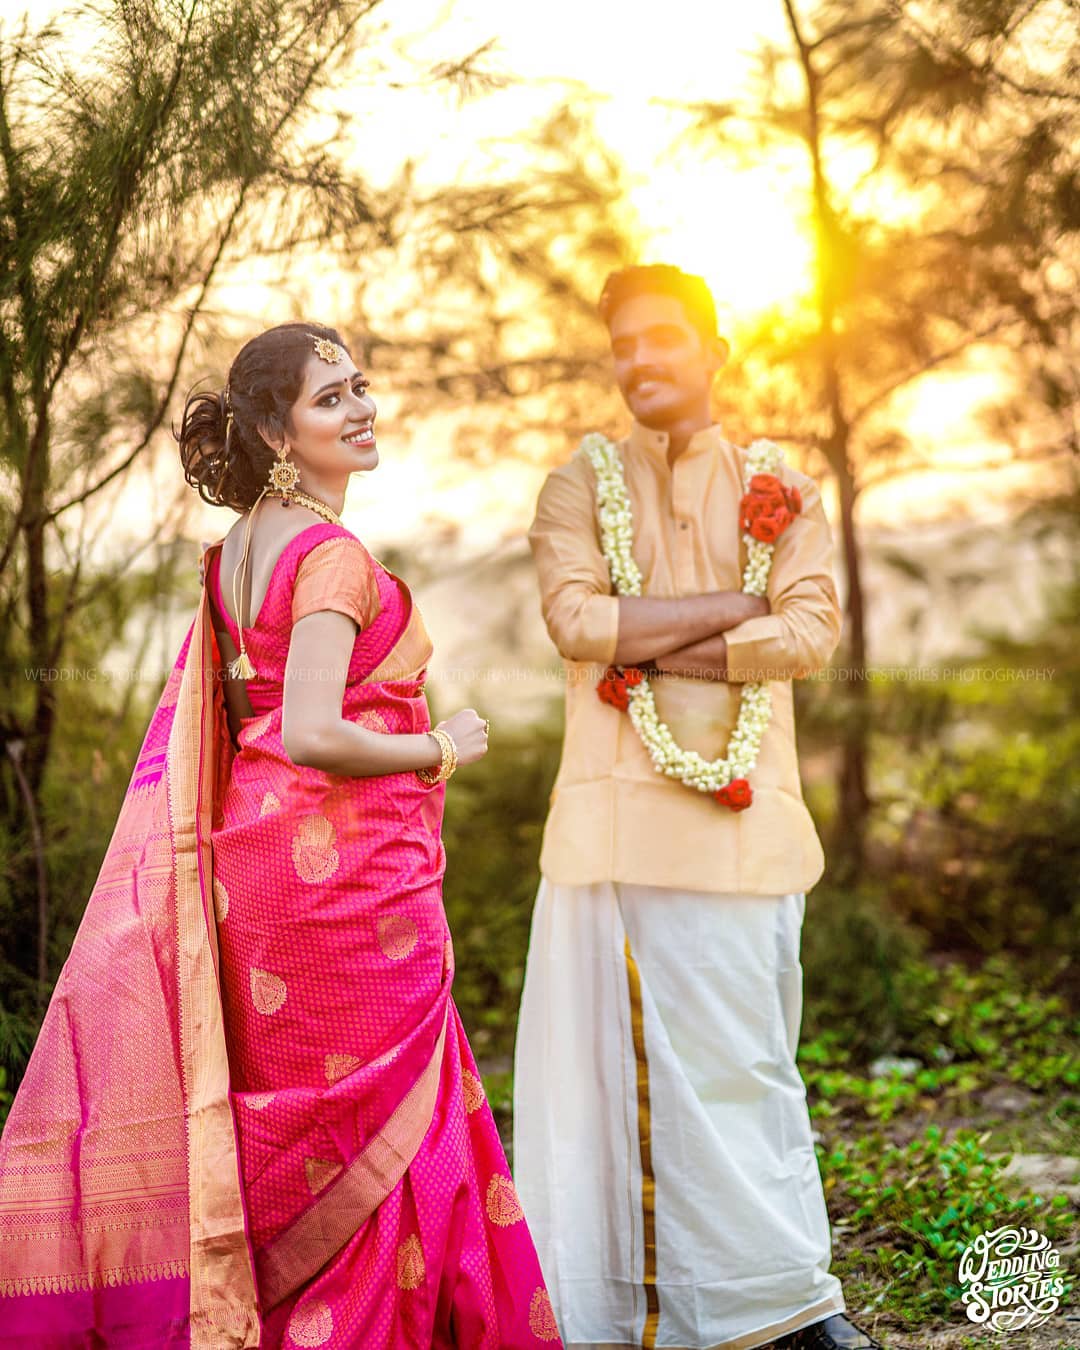 25+ Poses for South Indian Wedding Couples | Indian wedding couple, Indian  wedding poses, Wedding couple poses